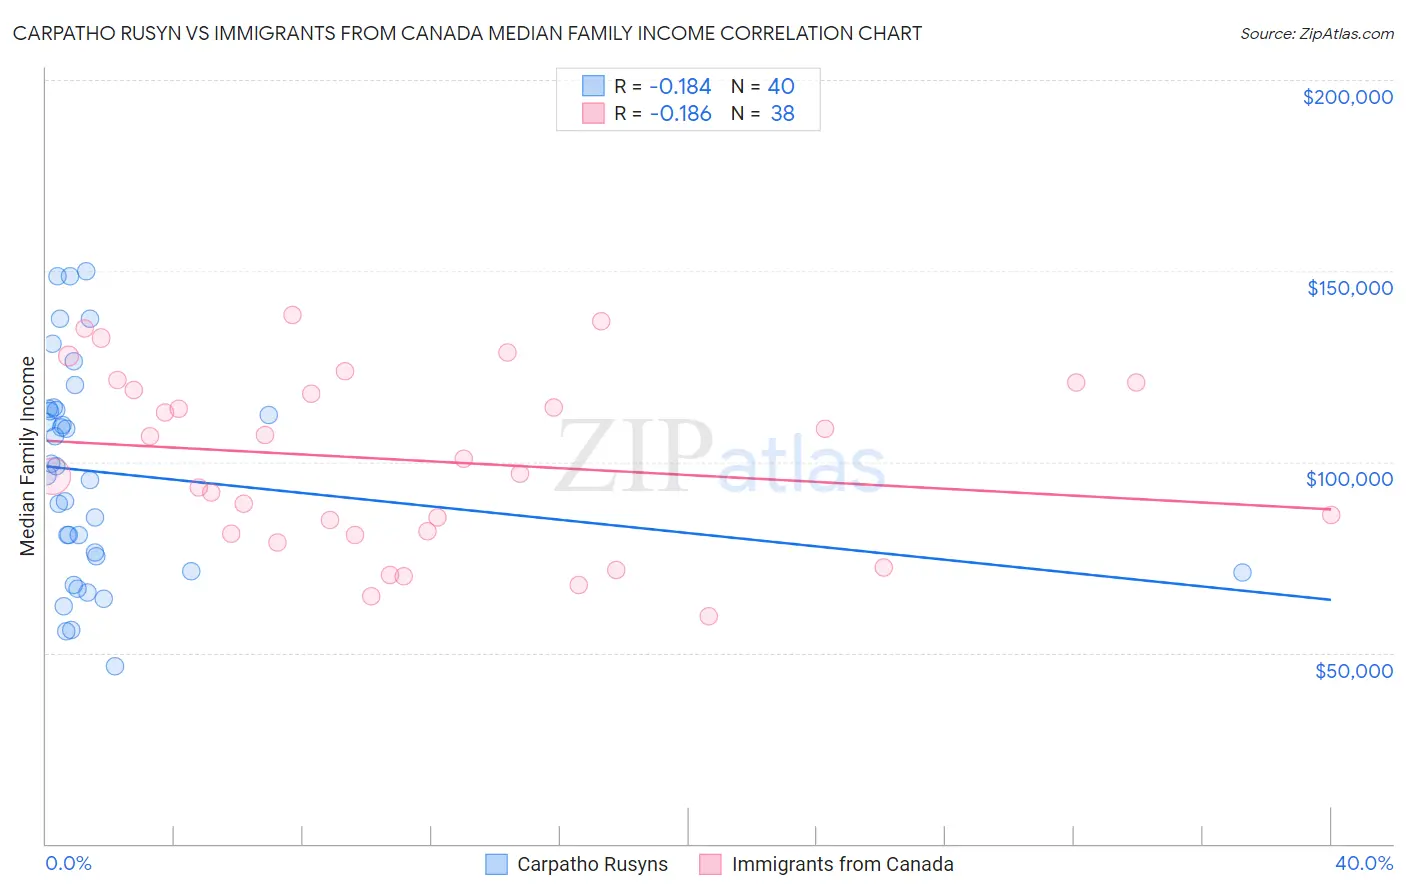 Carpatho Rusyn vs Immigrants from Canada Median Family Income